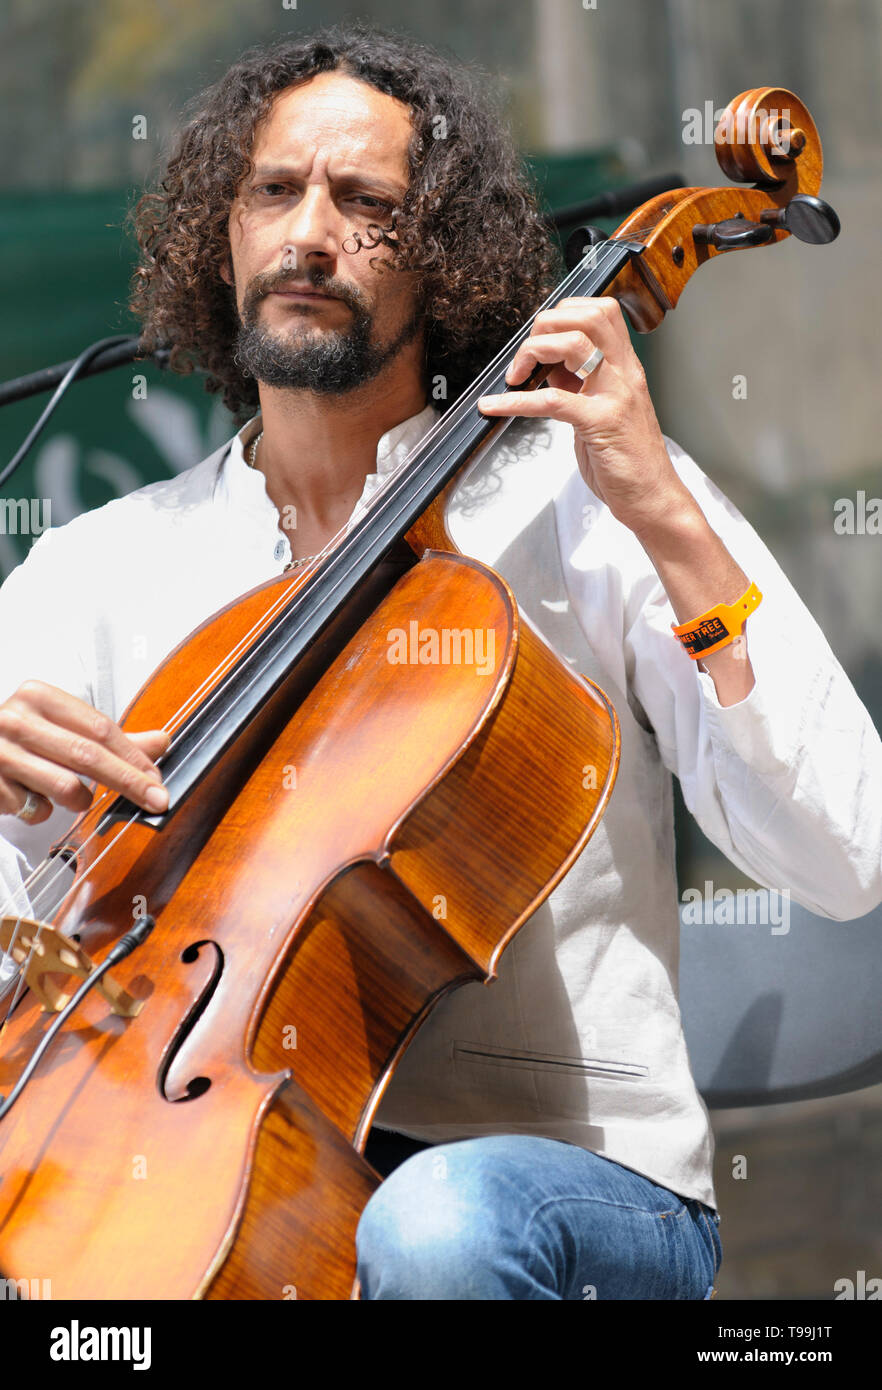 Cellist  Ivan Hussey of Celloman performing at the Larmer Tree Festival, UK. July 18, 2014 Stock Photo